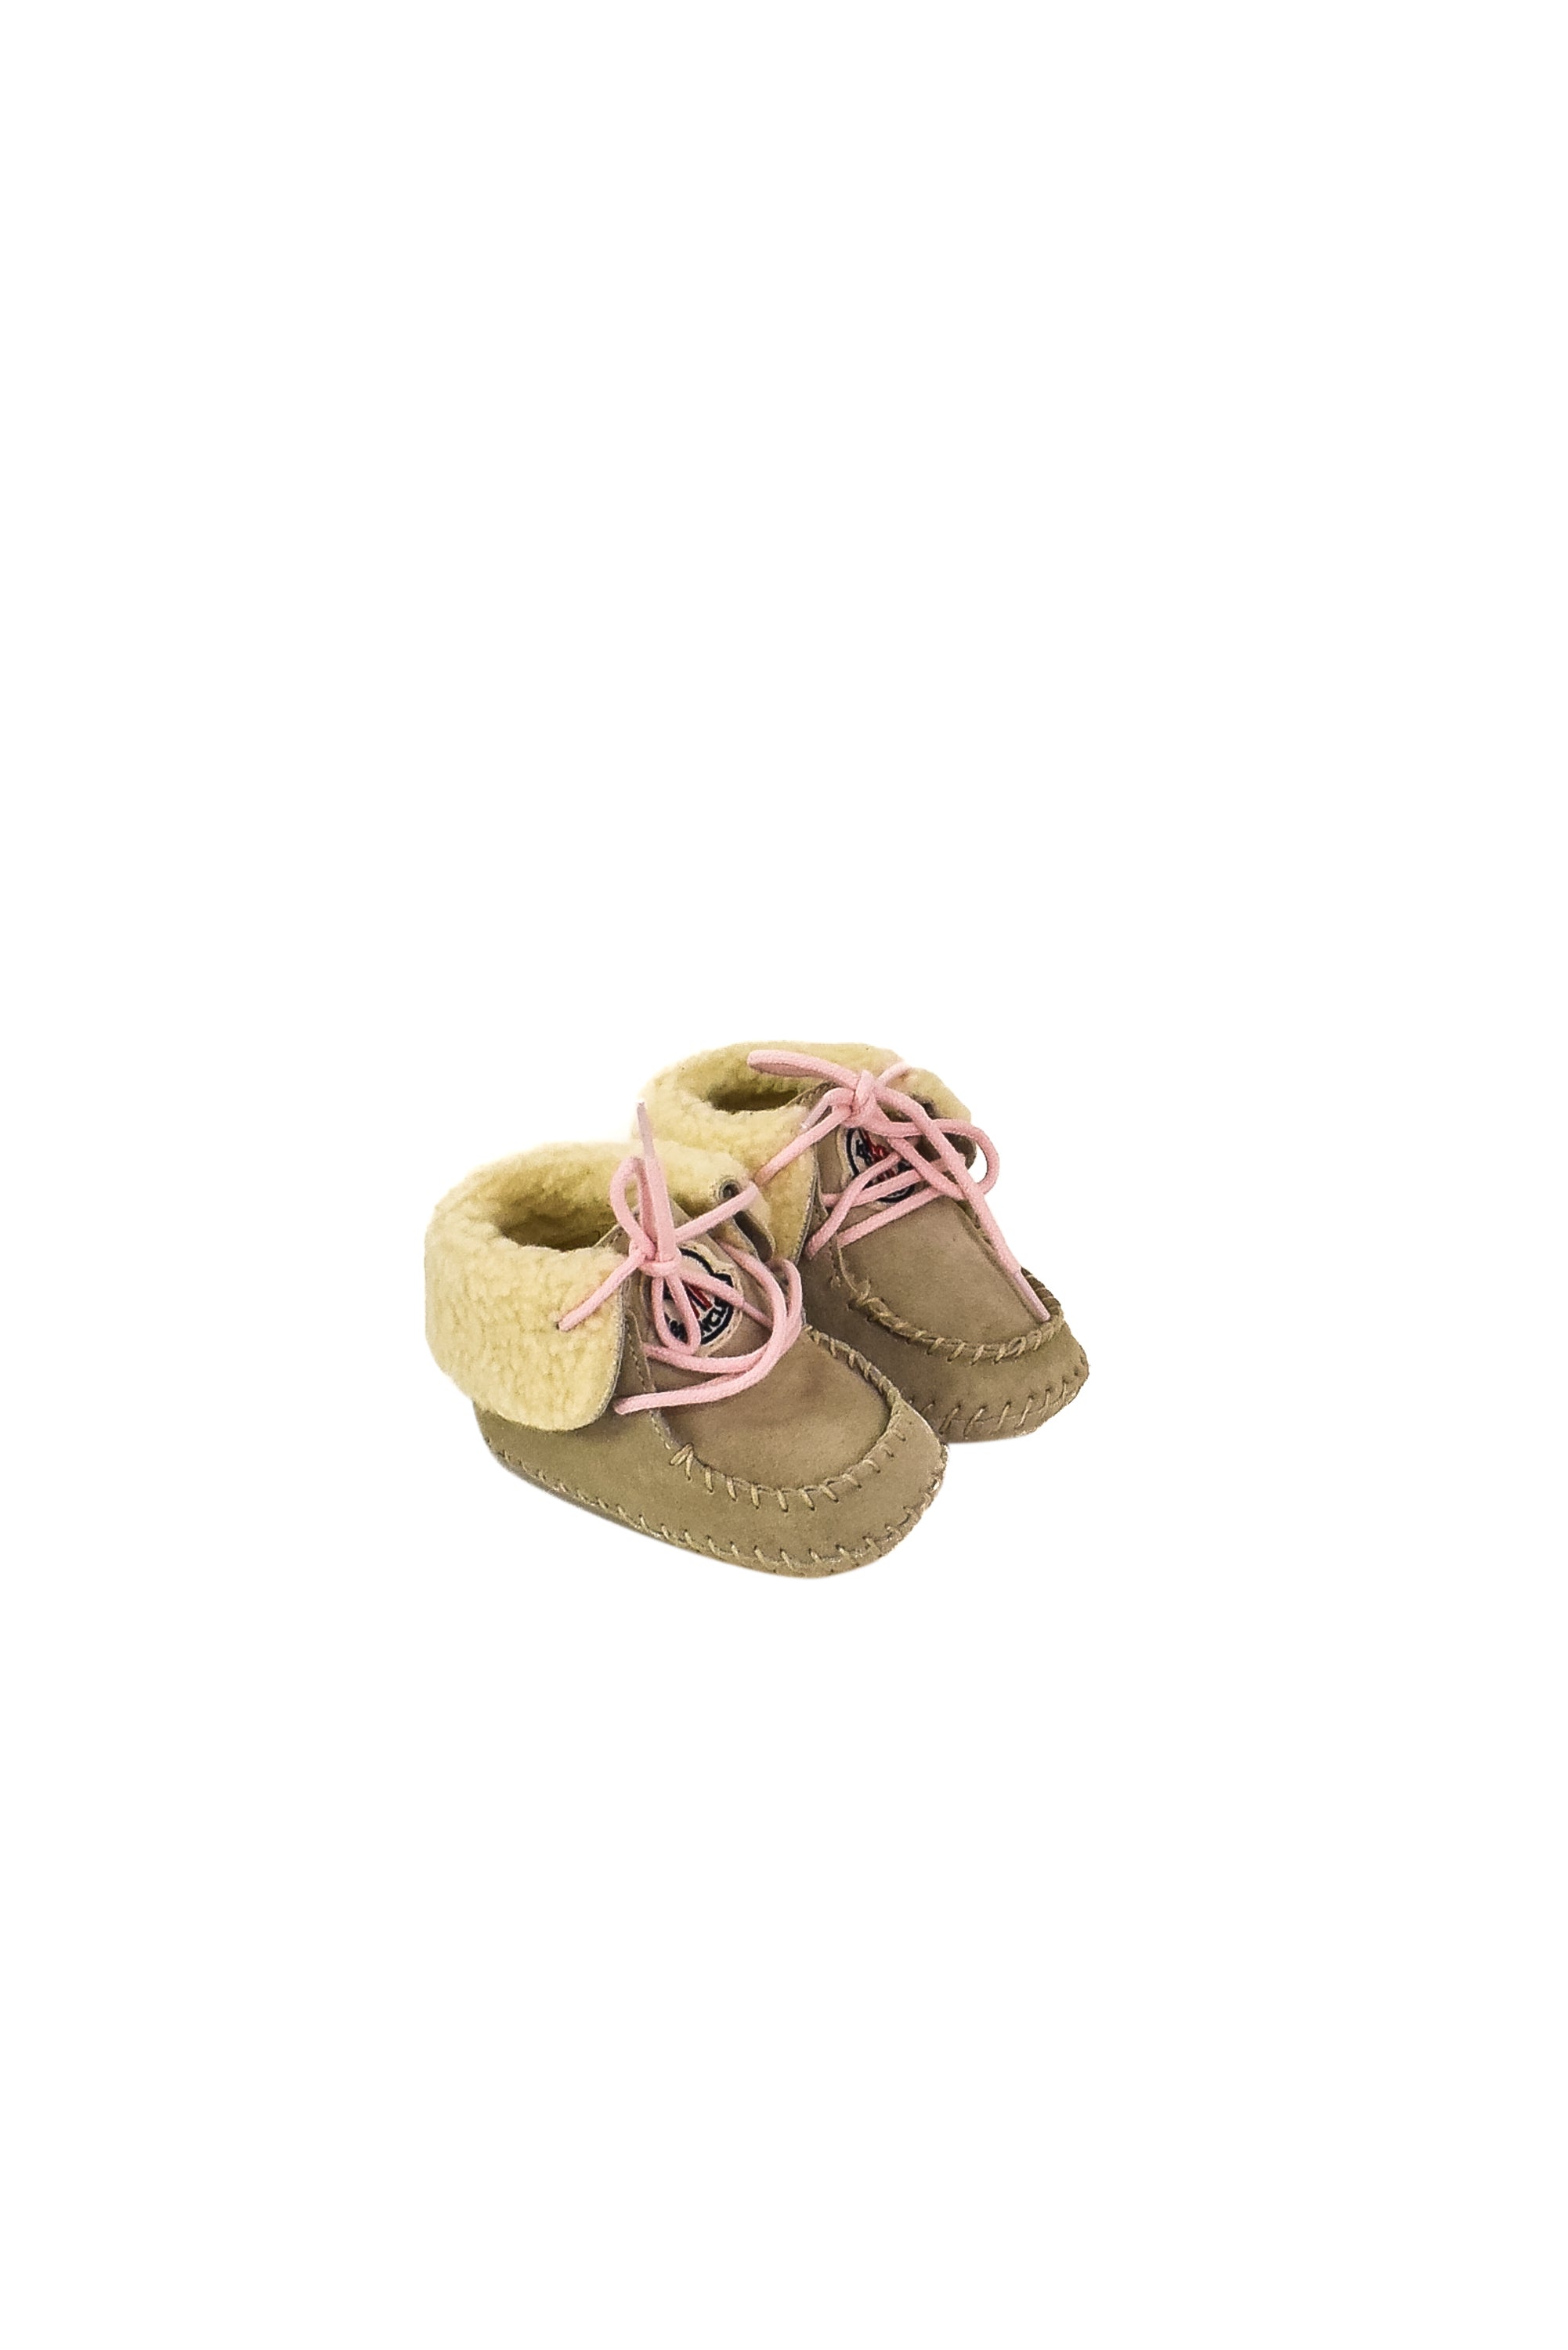 moncler baby shoes